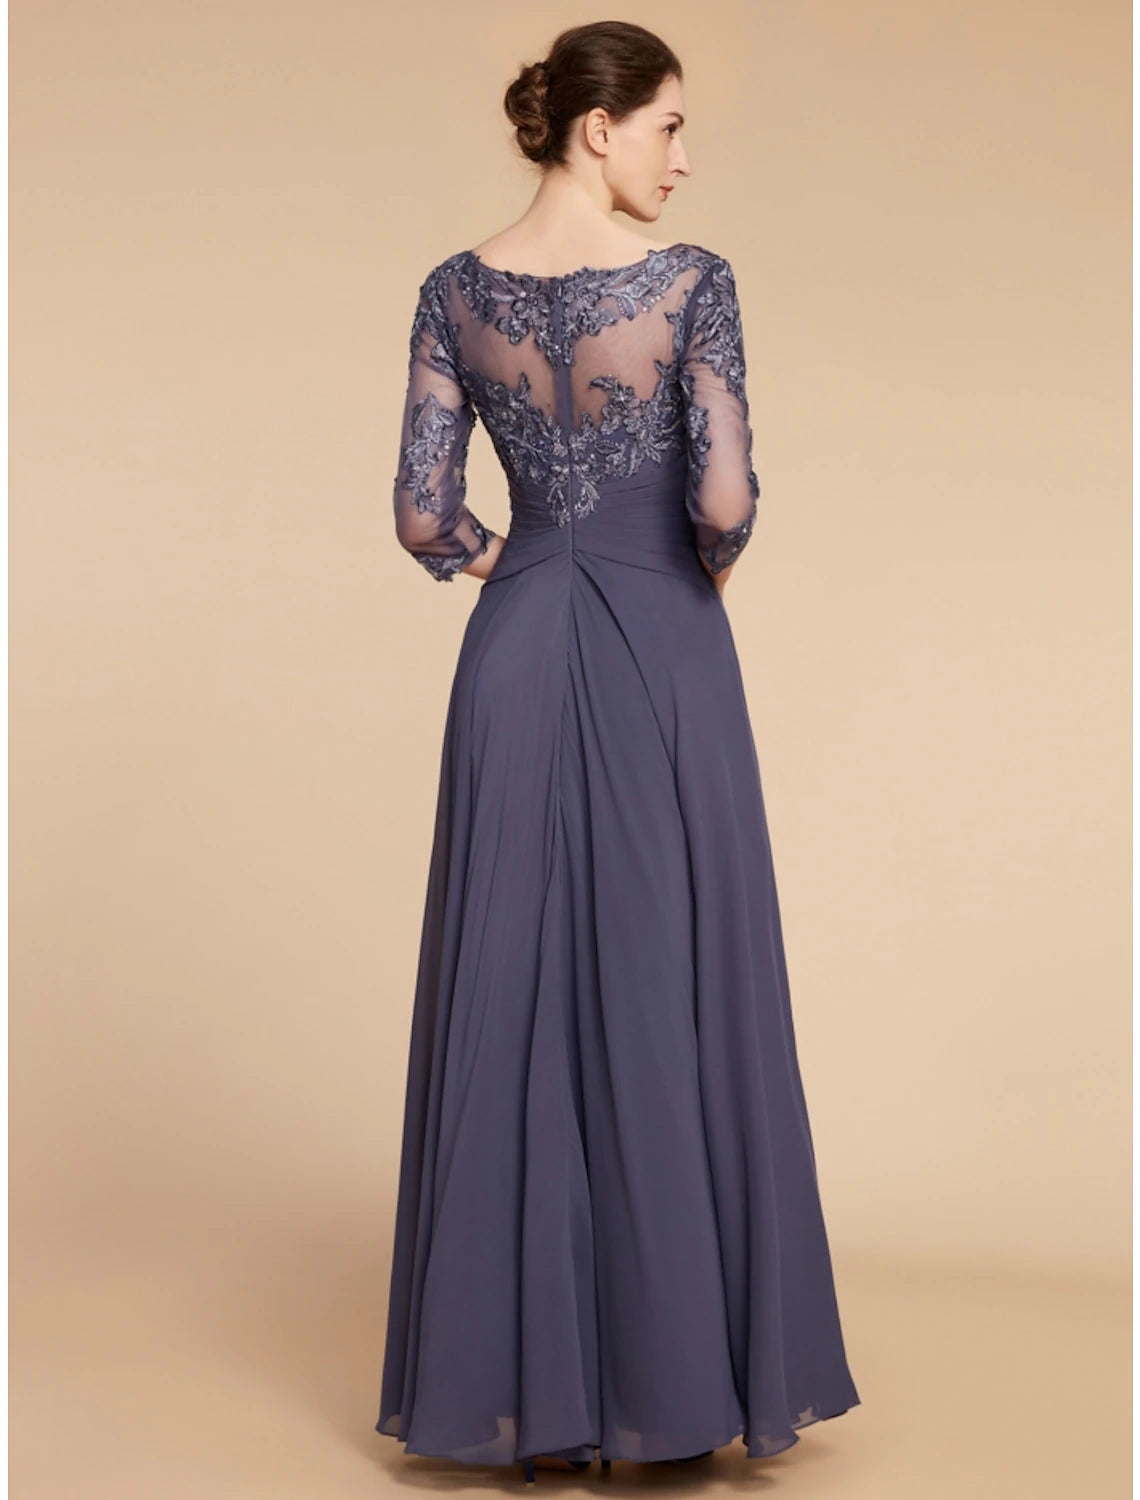 A-Line Mother of the Bride Dress Wedding Guest Elegant Scoop Neck Floor Length Chiffon Lace 3/4 Length Sleeve with Ruching Solid Color